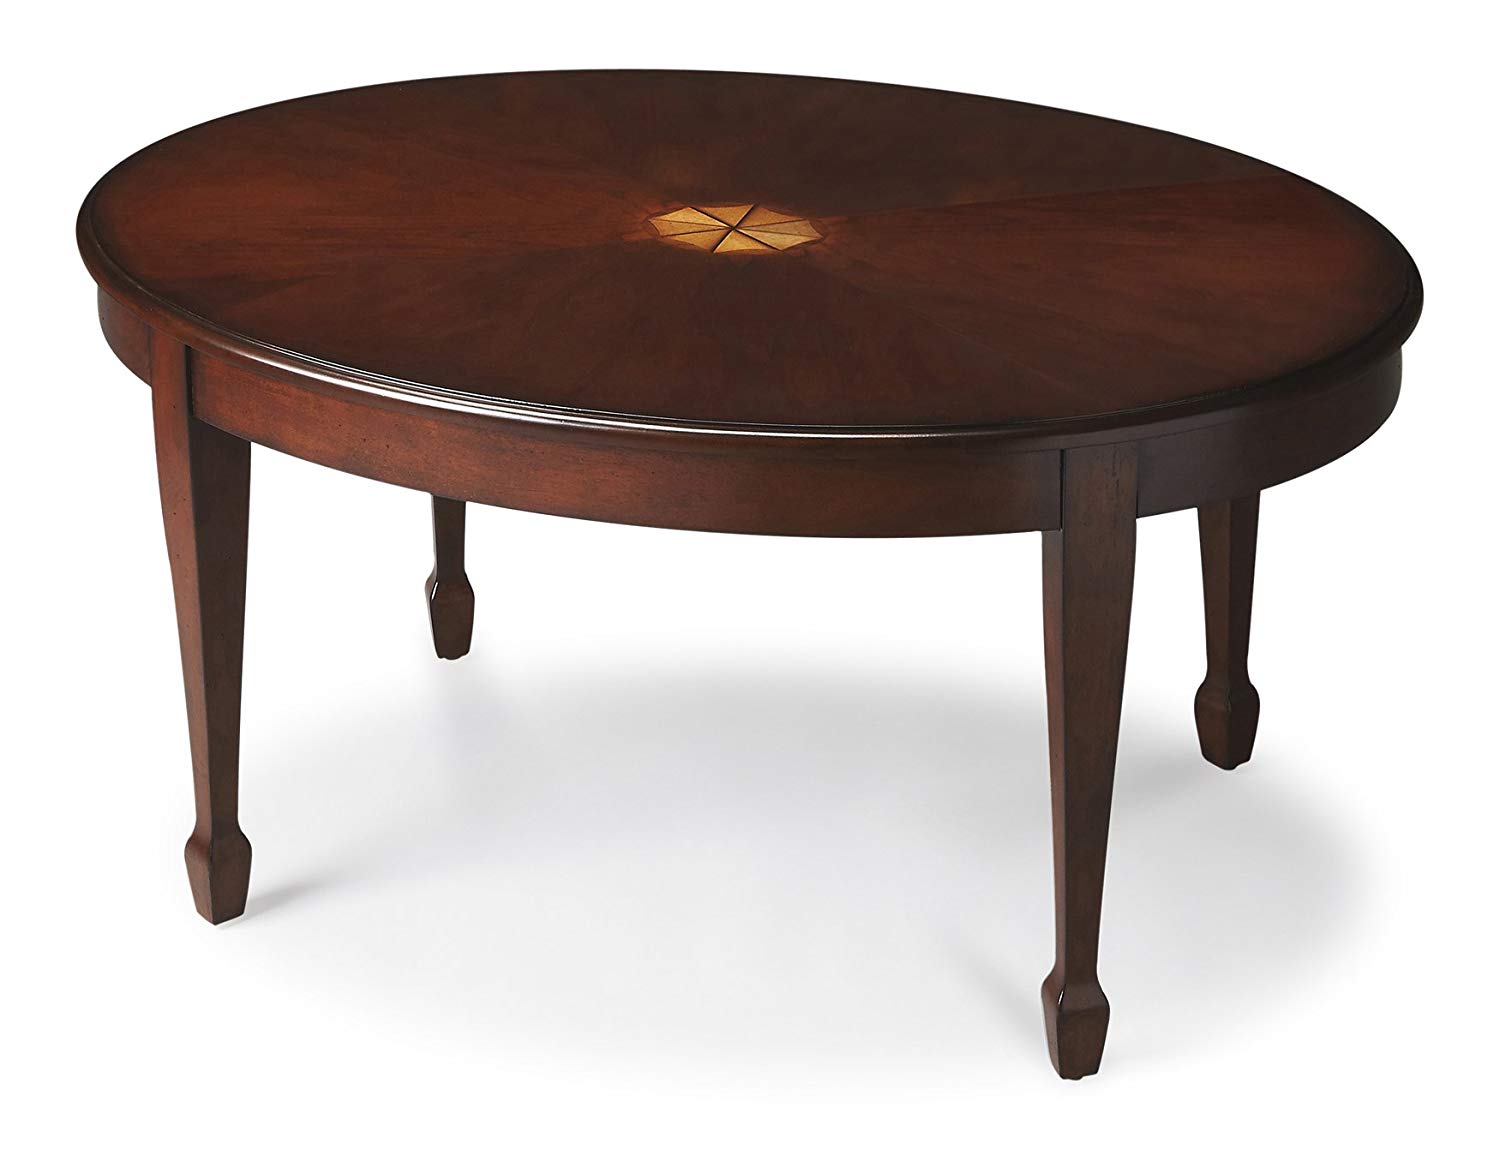 kensington row furniture collection coffee tables and end ravenscroft oval inlaid table cocktail plantation cherry bamboo glass designer pet beds beveled top larkinhurst earth